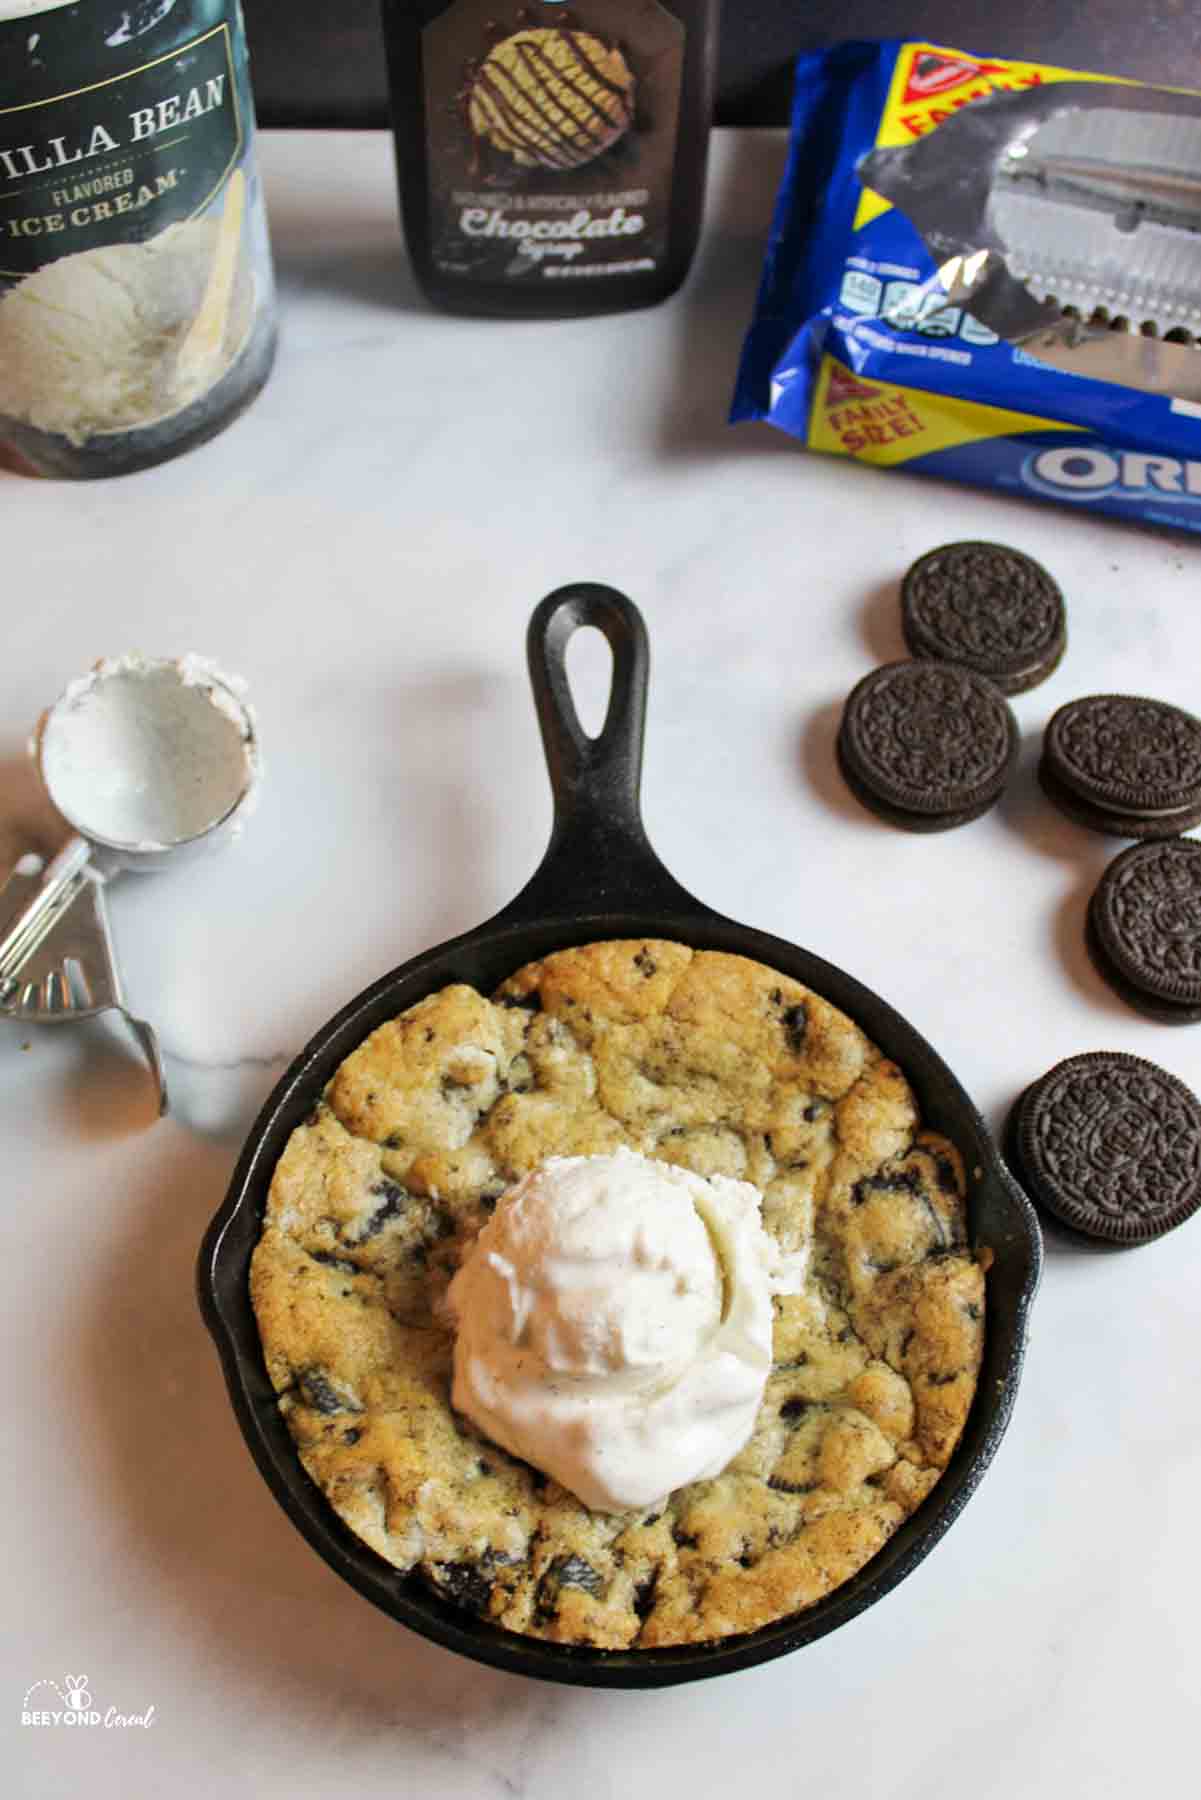 an oreo pizookie in a cast iron skillet with ice cream scoop on top. Use scooper to the side and more food items such as ice cream container, chocolate syrup bottole and oreos in and out of package around the skillet cookie